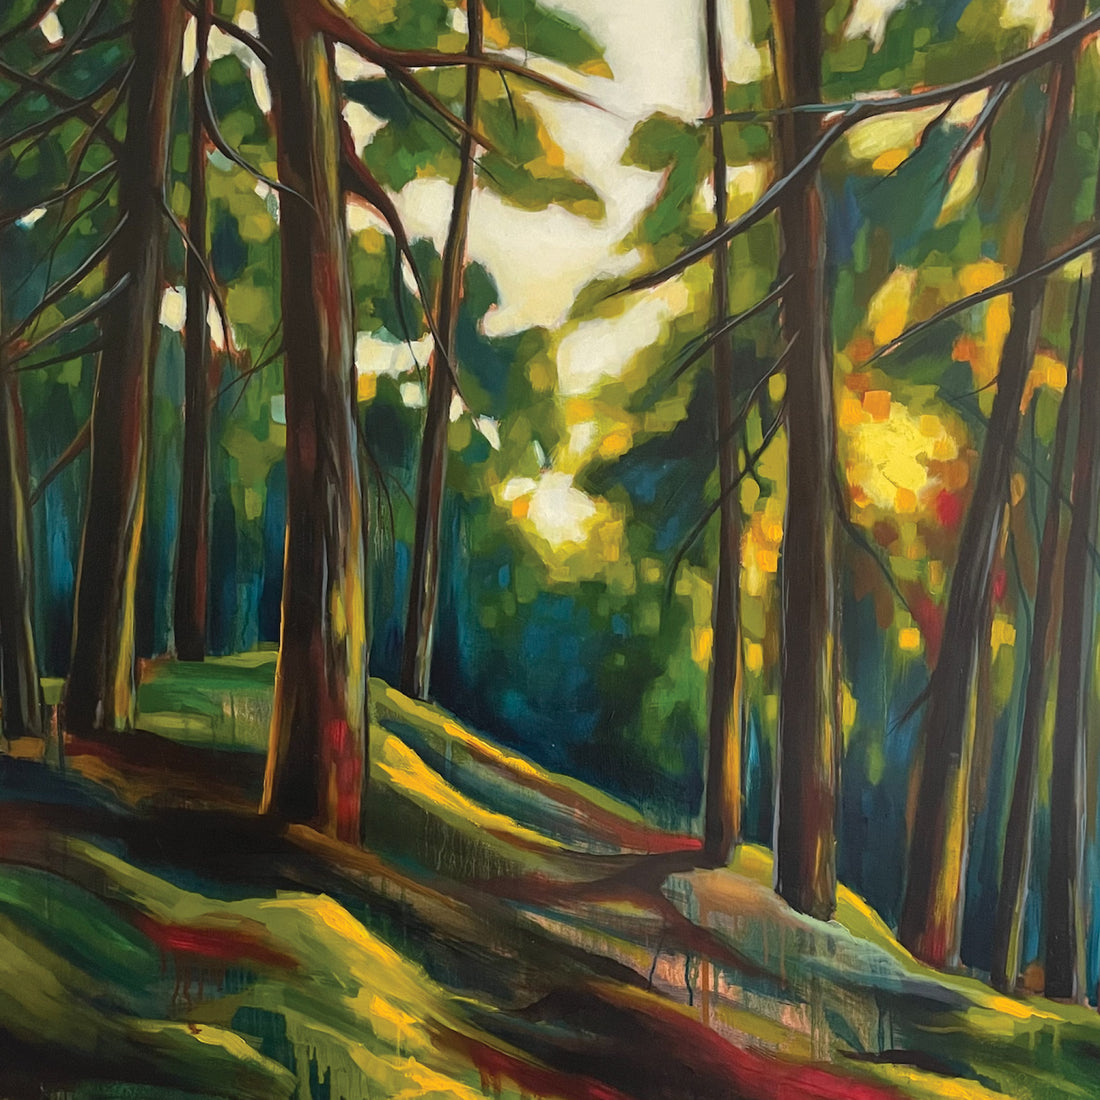 Marta Stares "On Gentle Ground" landscape painting Canadian Art